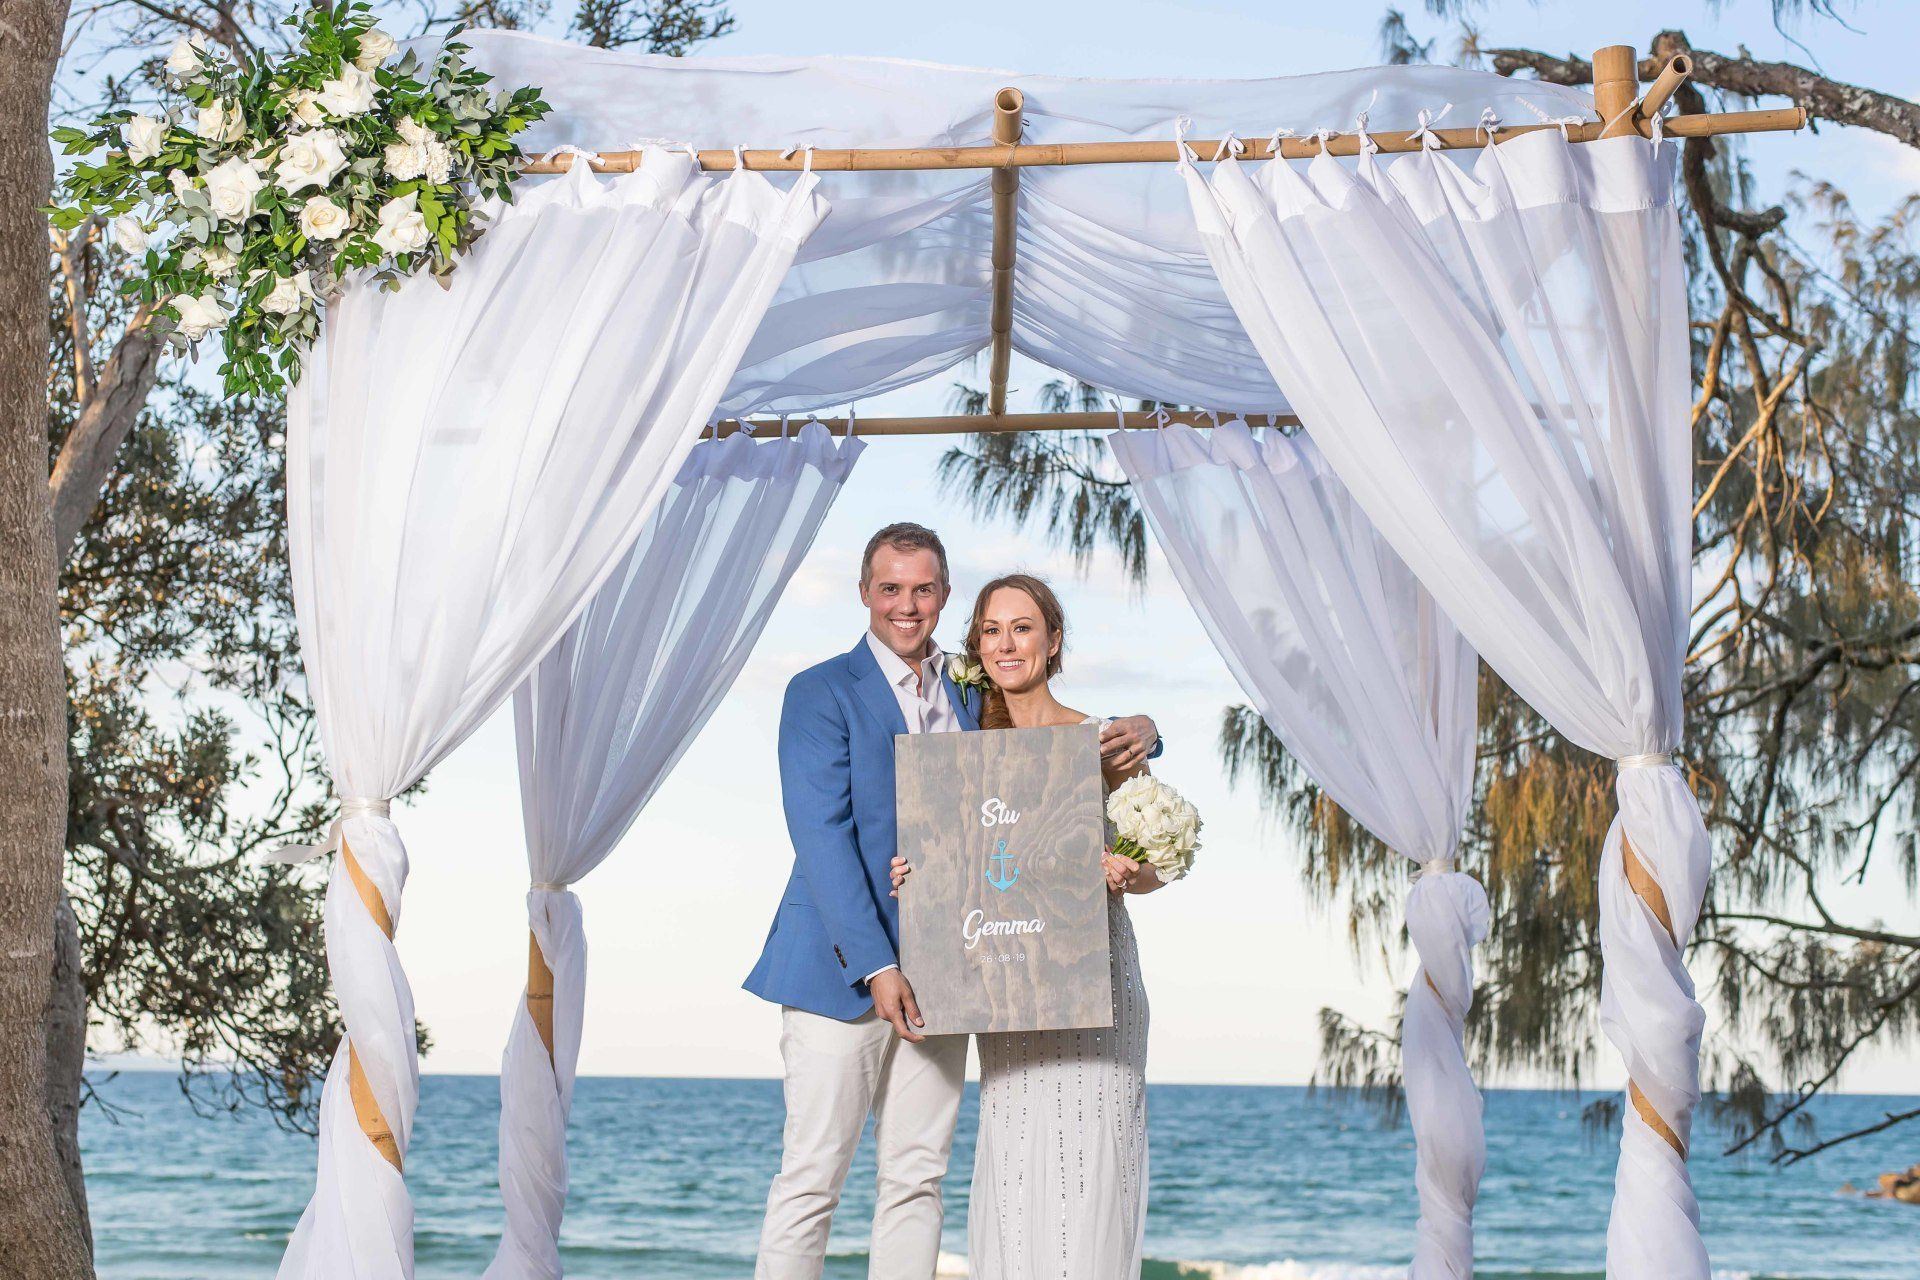 couple under wedding arbor holding sign with their names after their Wedding at Noosa beach Access 14/15